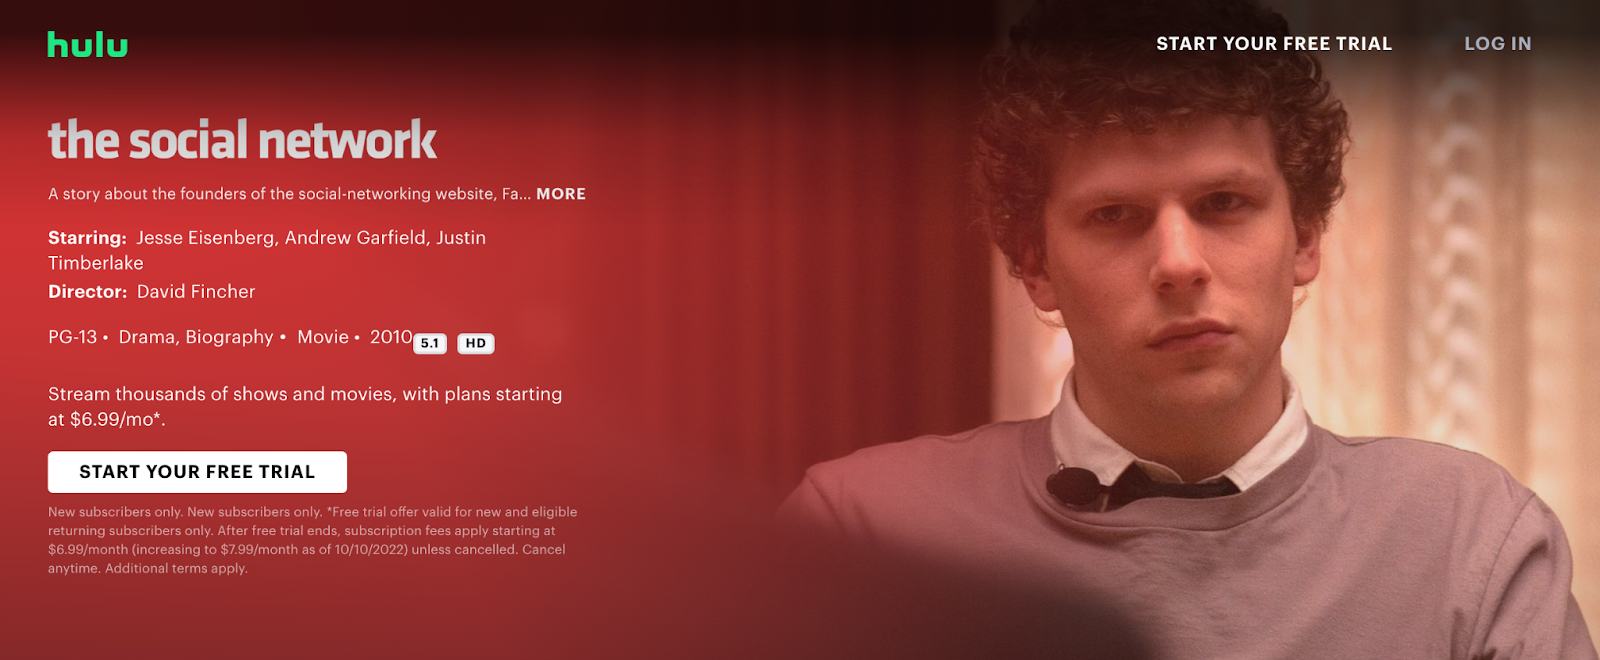 The Social Network movie available on Hulu.